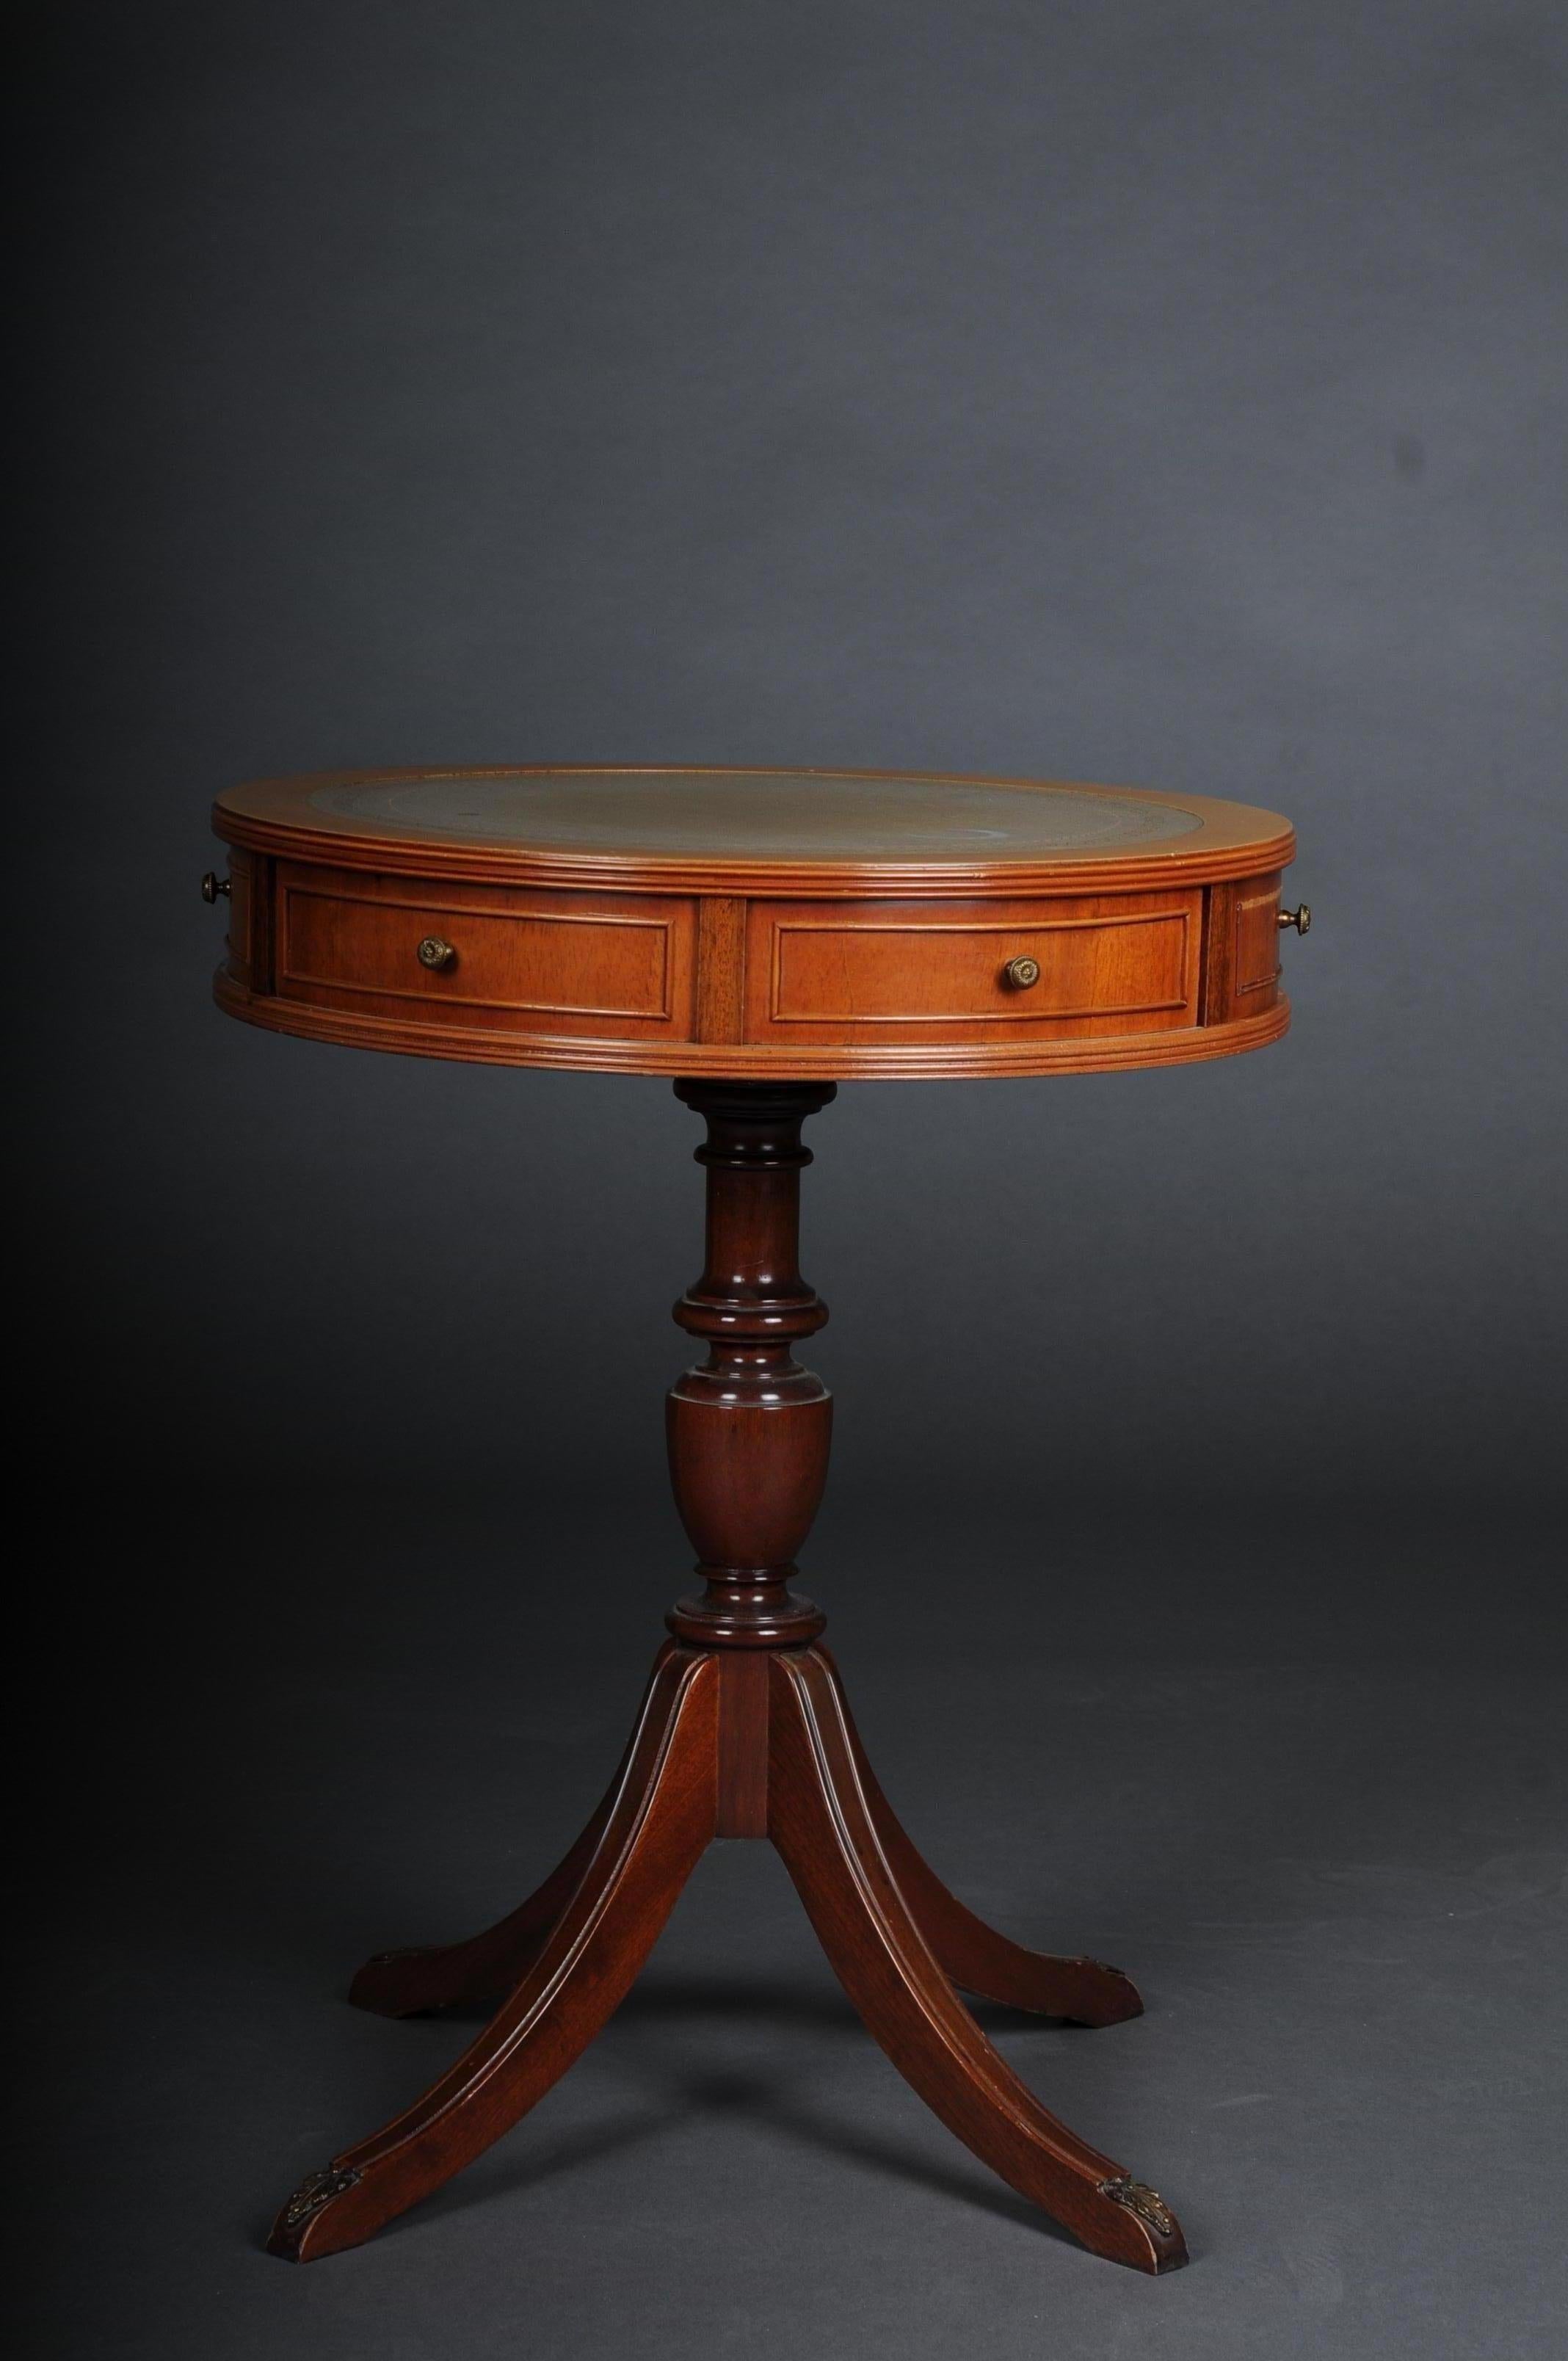 English side table / table, 20th century

Solid wood stained with mahogany. English side table, 20th century 19th century, Victorian. Round top with 2 drawers. Round cover plate on profiled balustrade shaft ending on four curved feet. Green